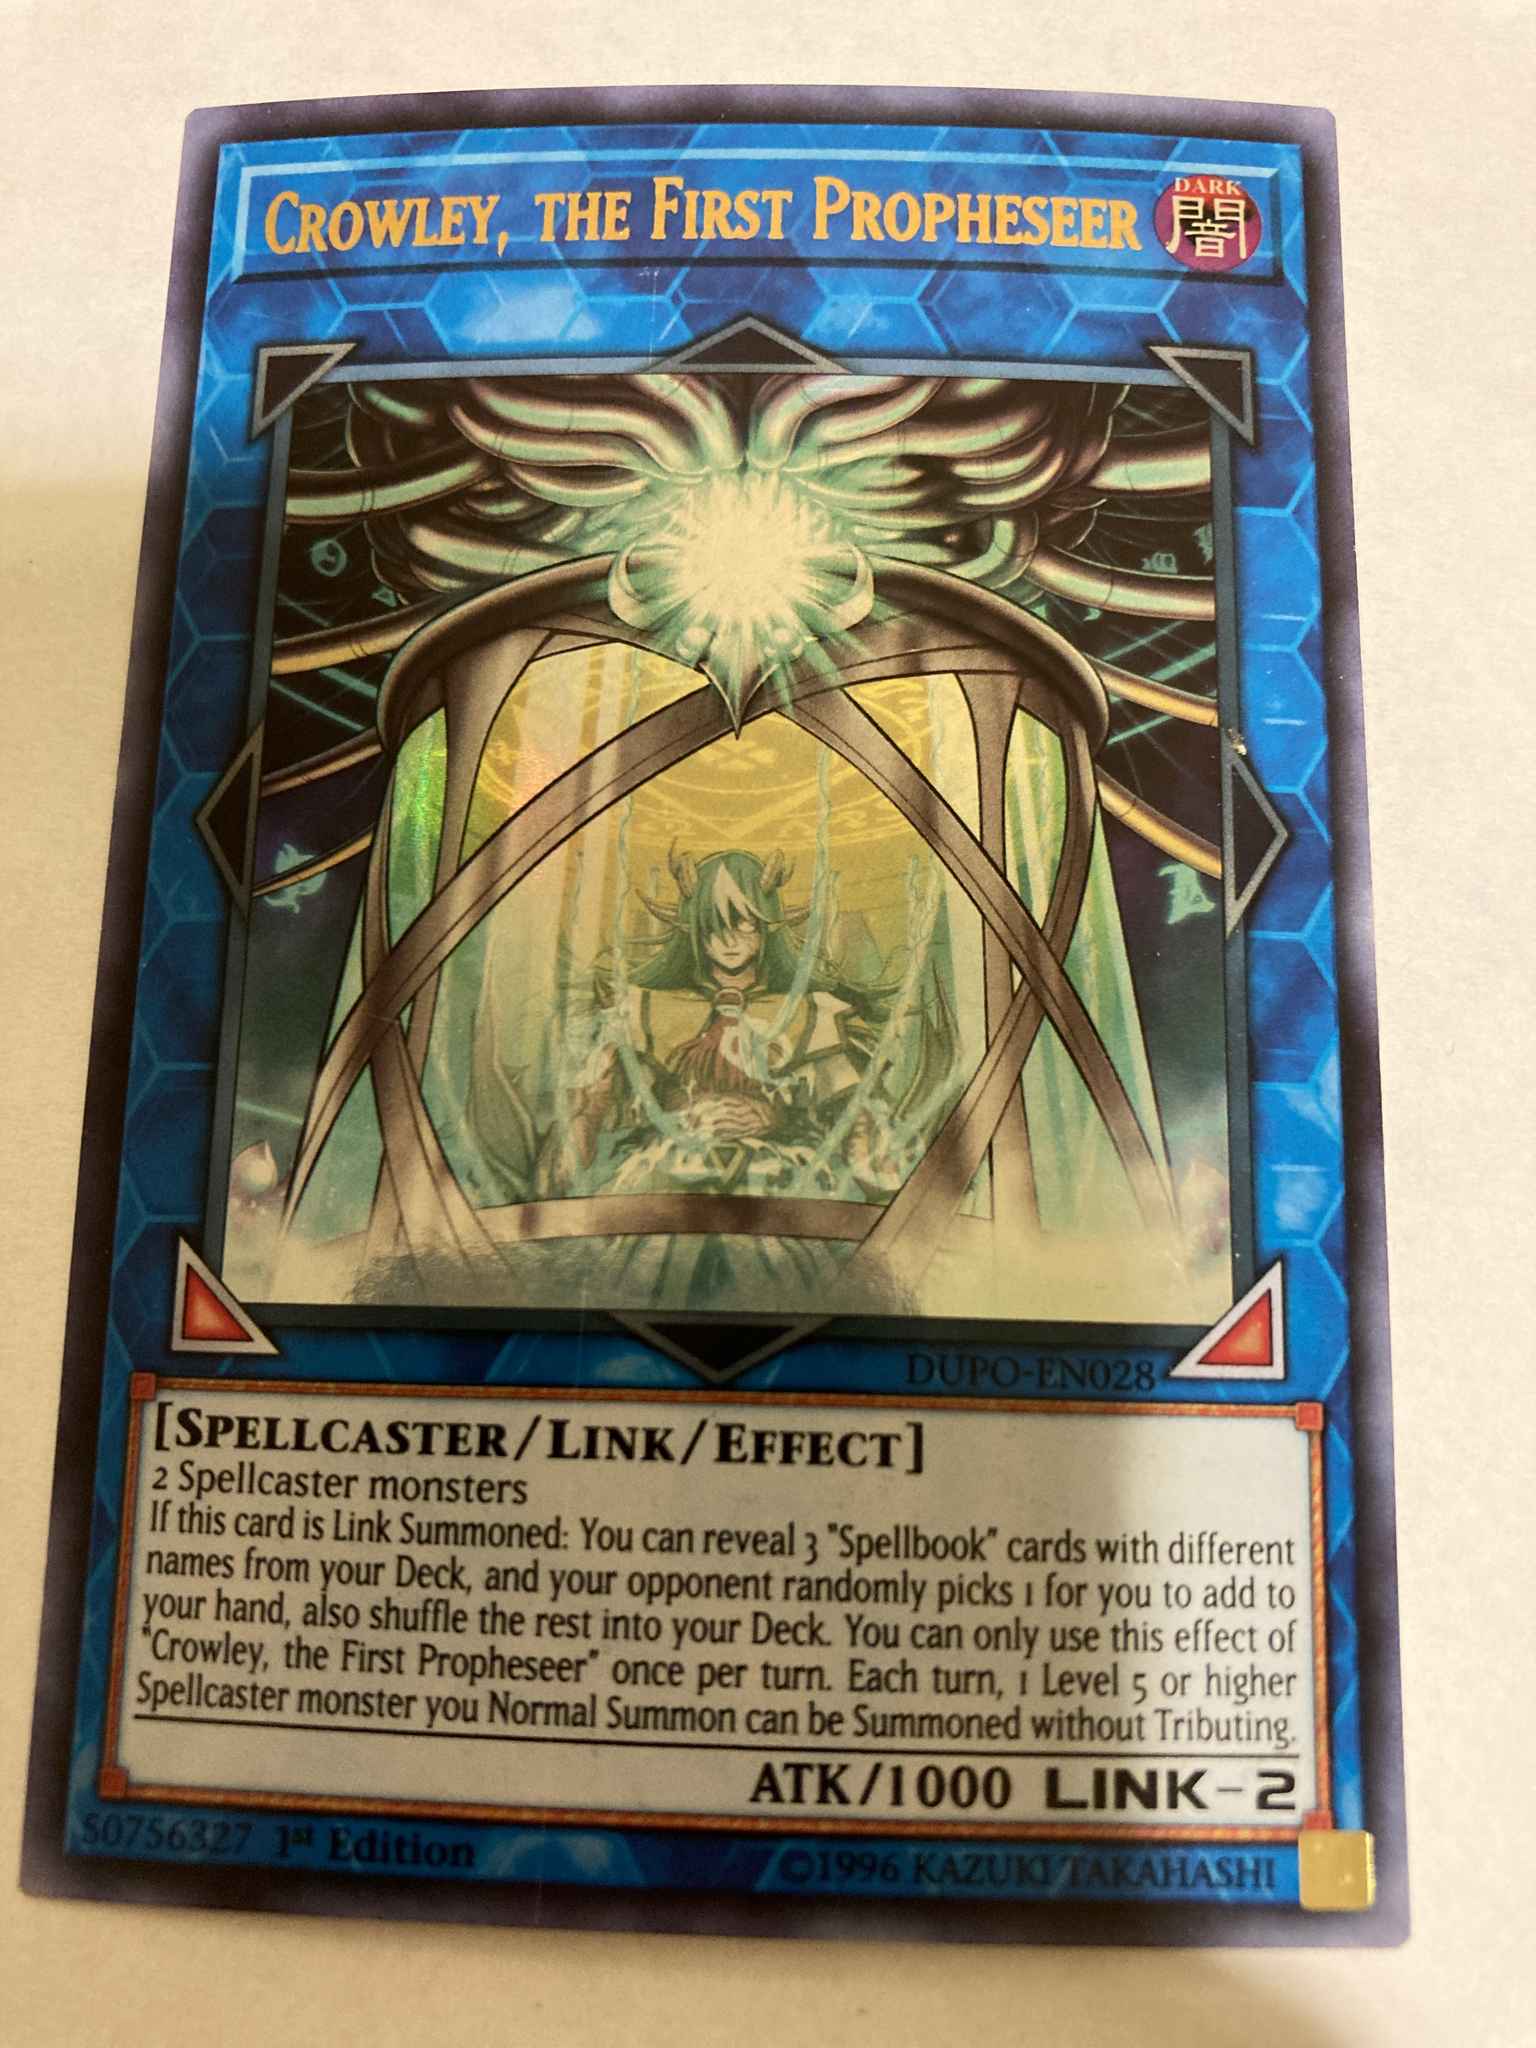 The First Propheseer 1st Edition Ultra Rare DUPO-EN072 Yu-Gi-Oh! Crowley